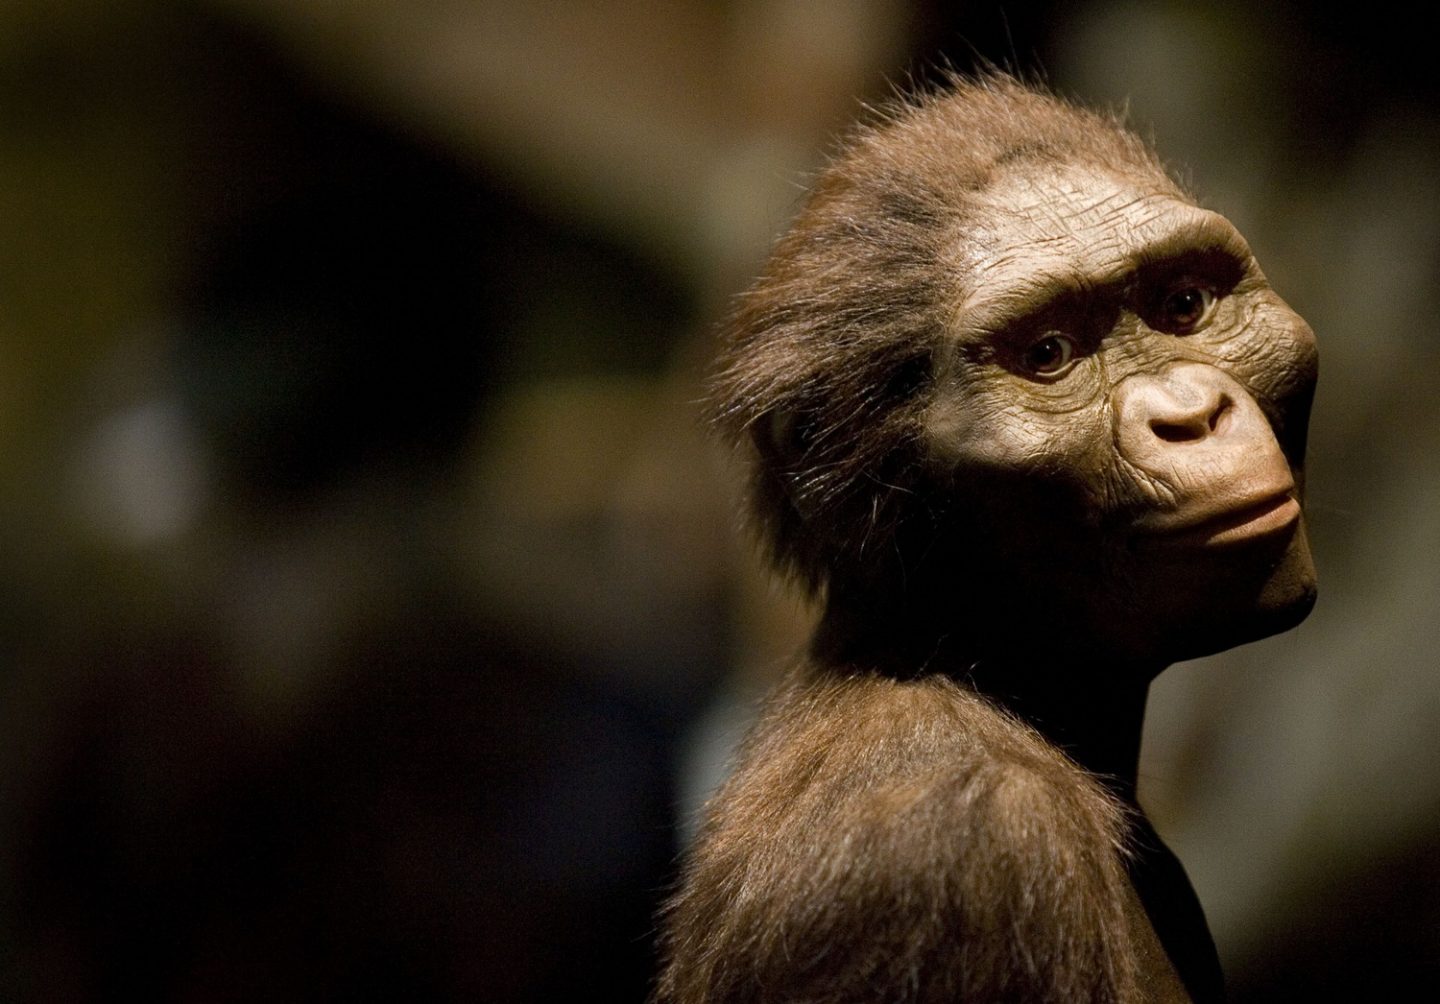 Concept of Australopithecus afarensis, better known as Lucy